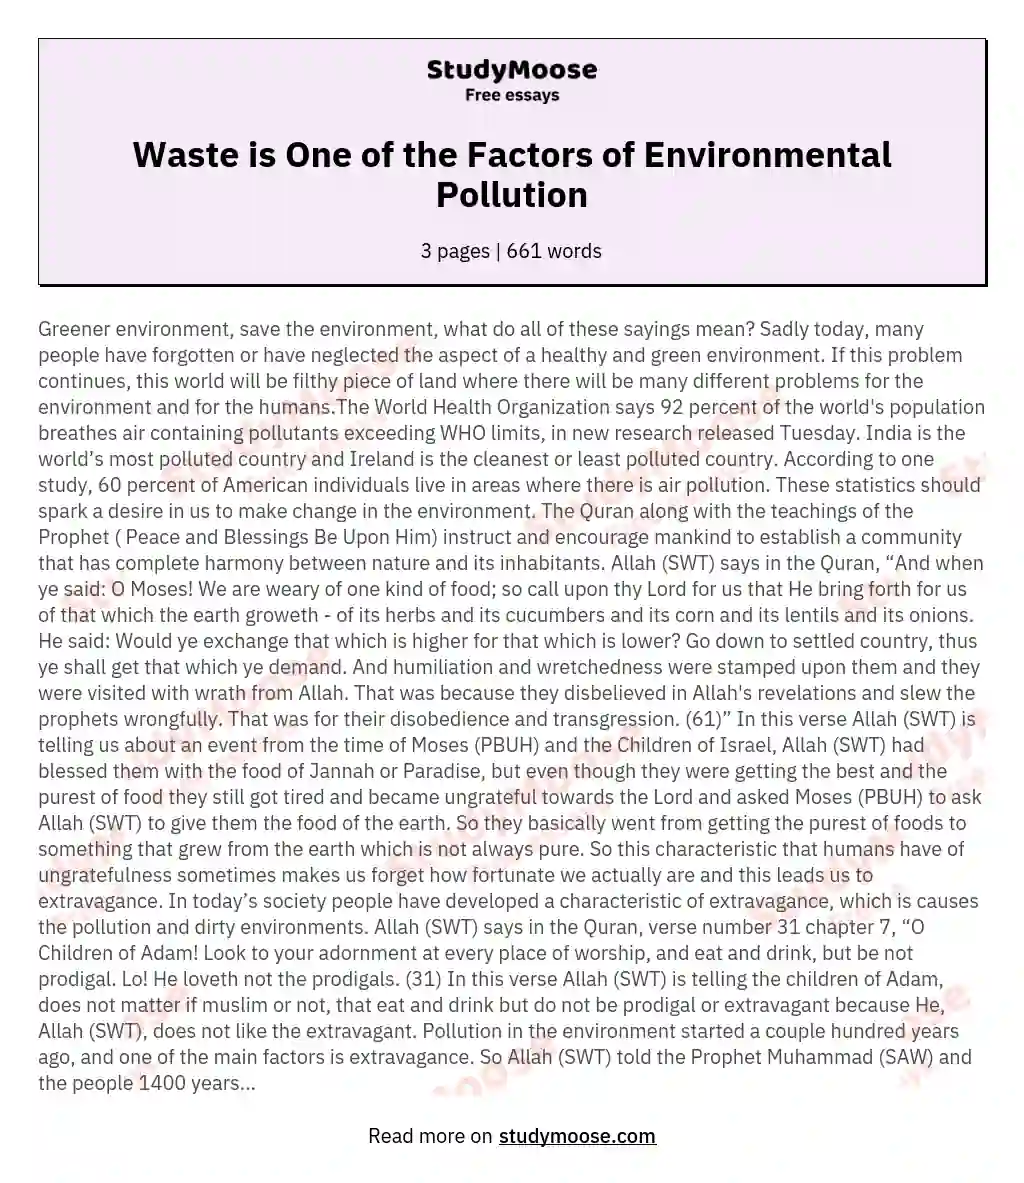 Waste is One of the Factors of Environmental Pollution essay